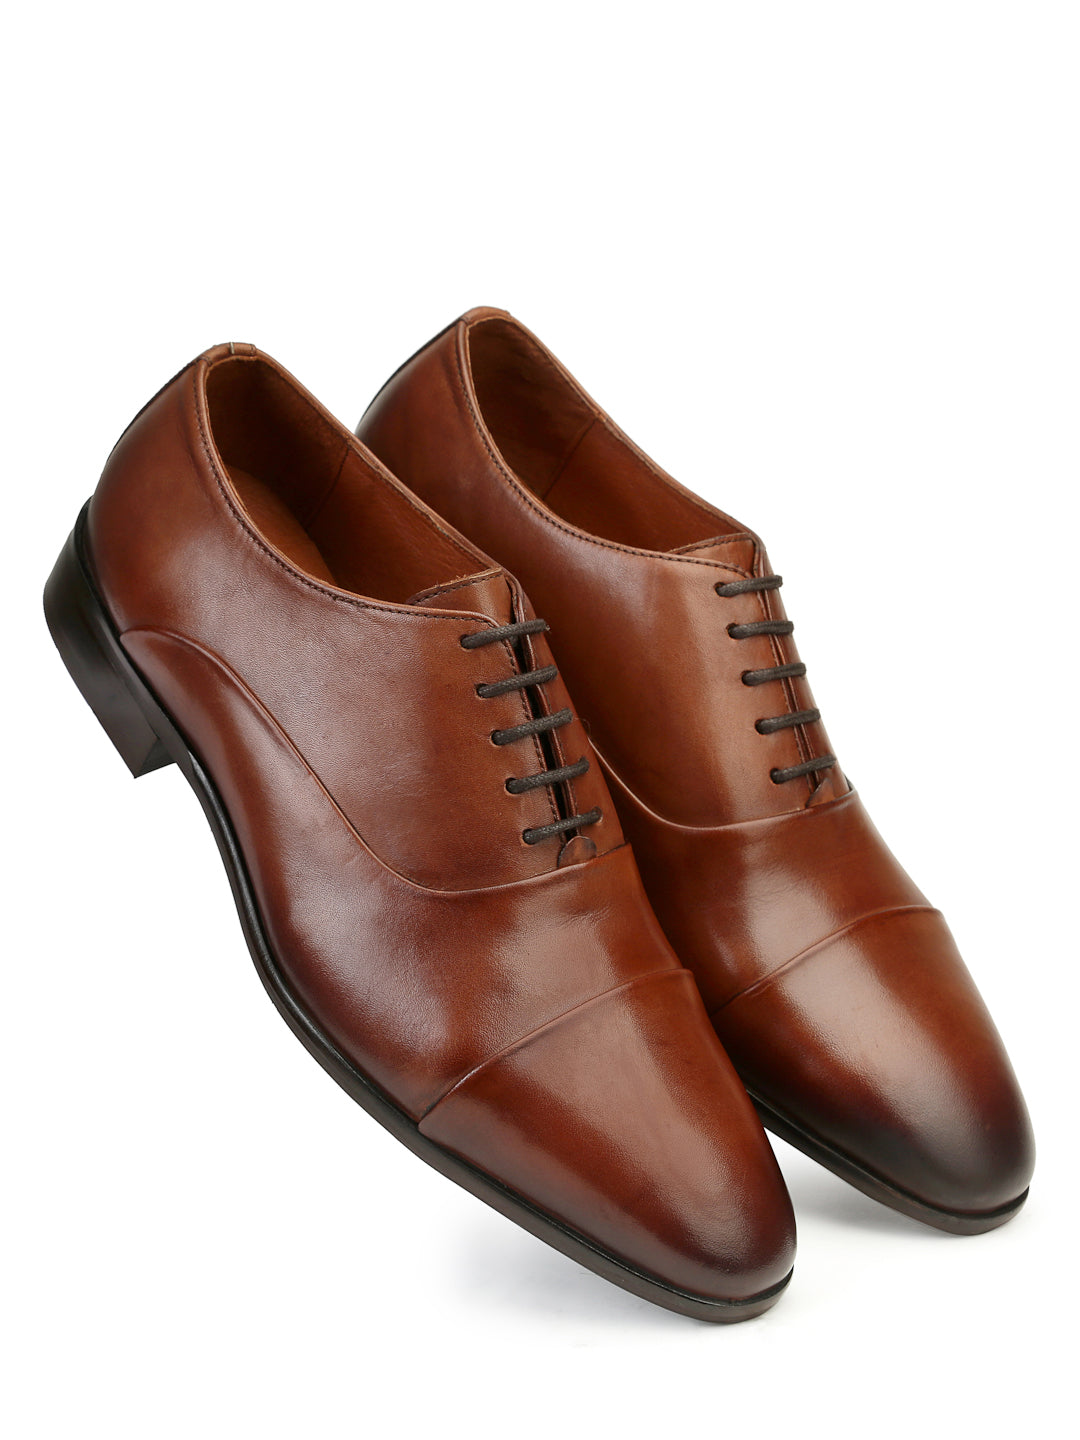 Shop for Men Brown Leather Lace Up Shoes - 890913 Online at